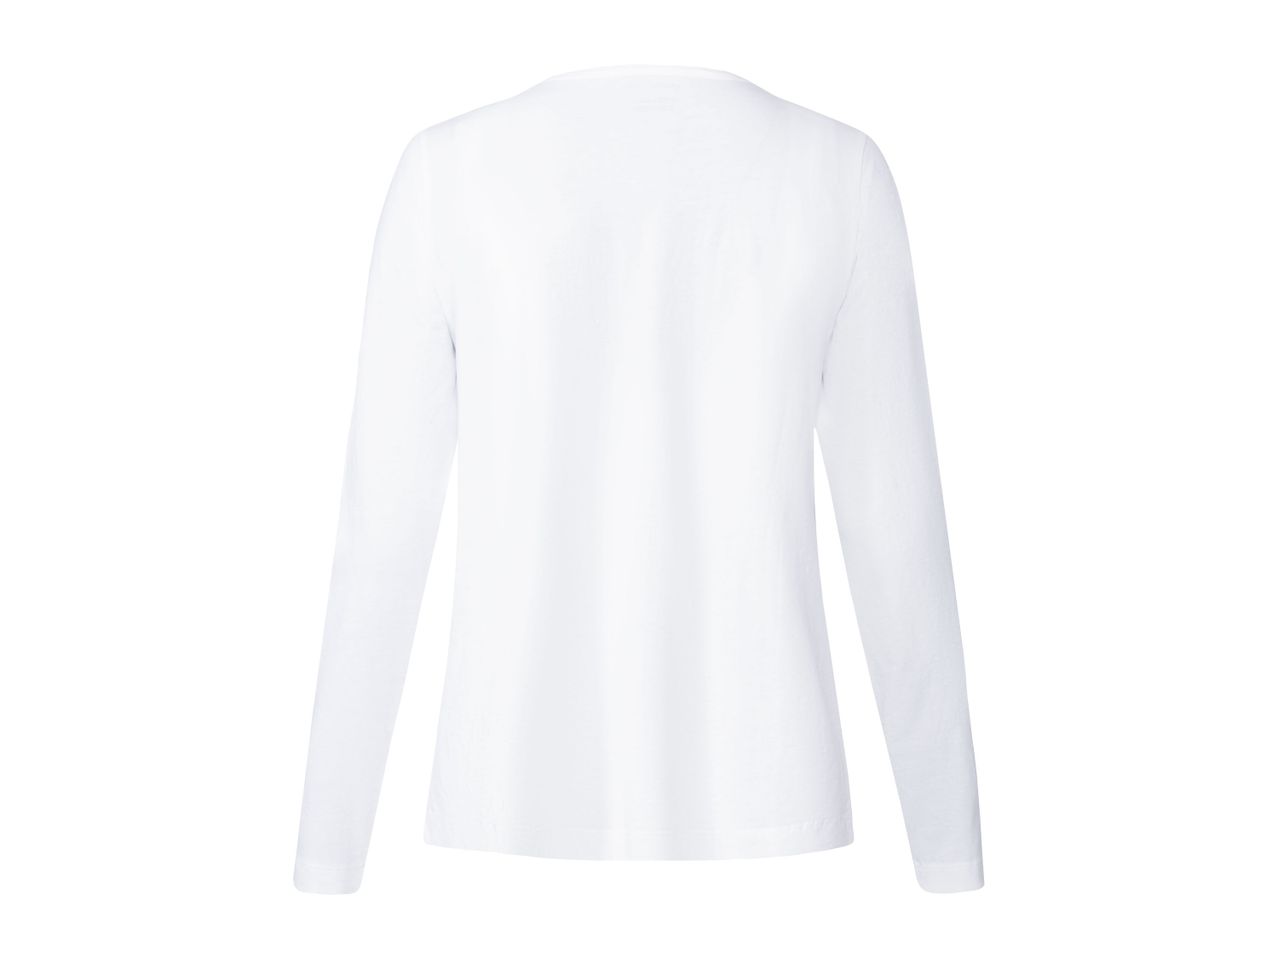 Go to full screen view: Ladies’ Long Sleeve Top - Image 4